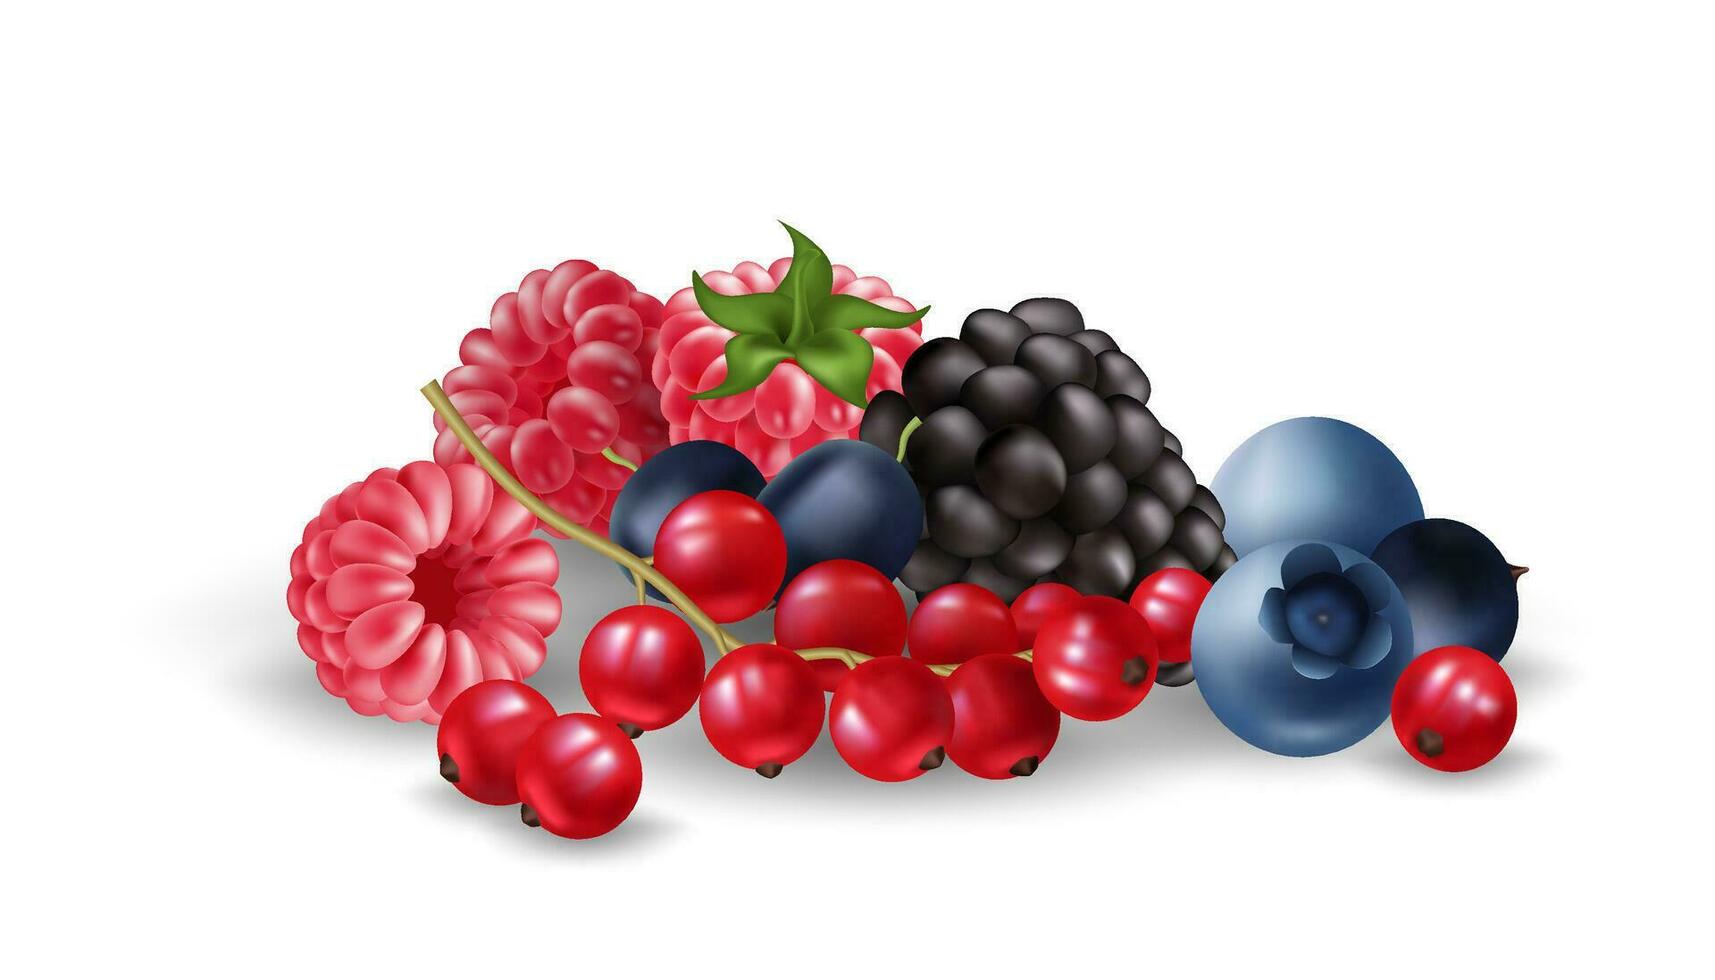 Realistic vector illustration set features a group of ripe and juicy berries, including blueberries, raspberries, blackberries, redcurrant. Delicious fruits for any summer themed design